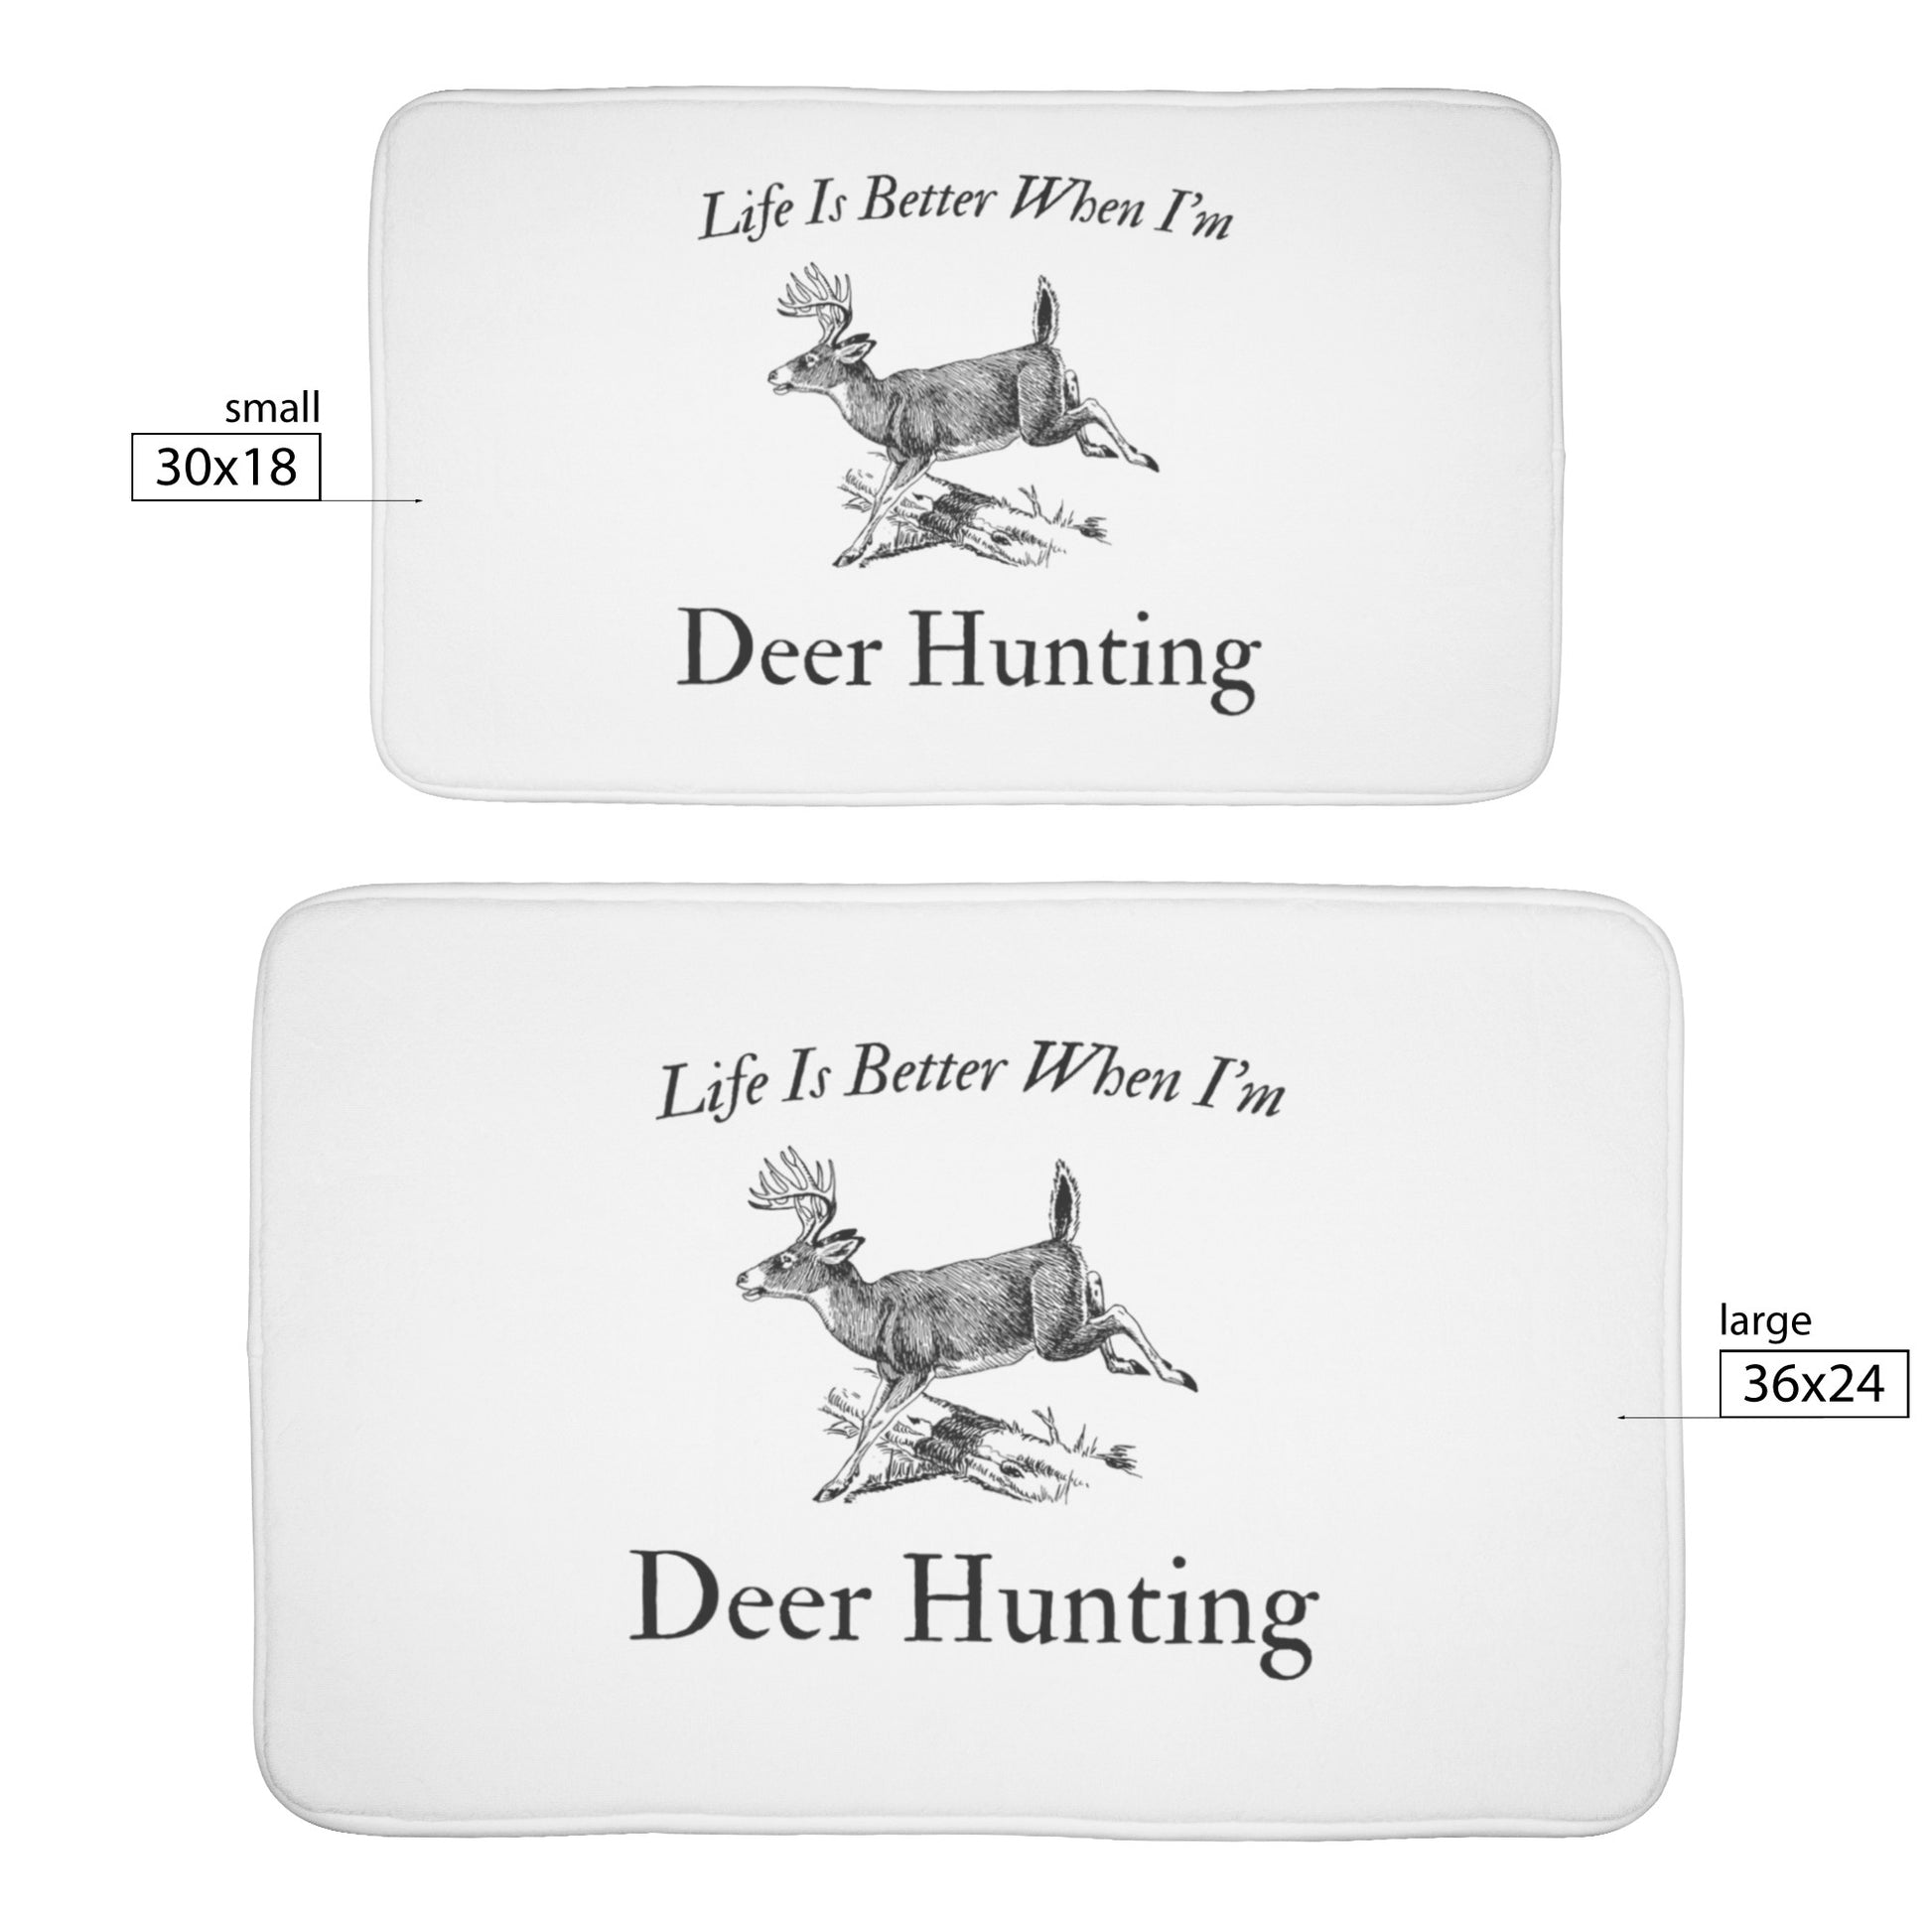 "Life Is Better When I'm Deer Hunting" Bath Mat - Weave Got Gifts - Unique Gifts You Won’t Find Anywhere Else!